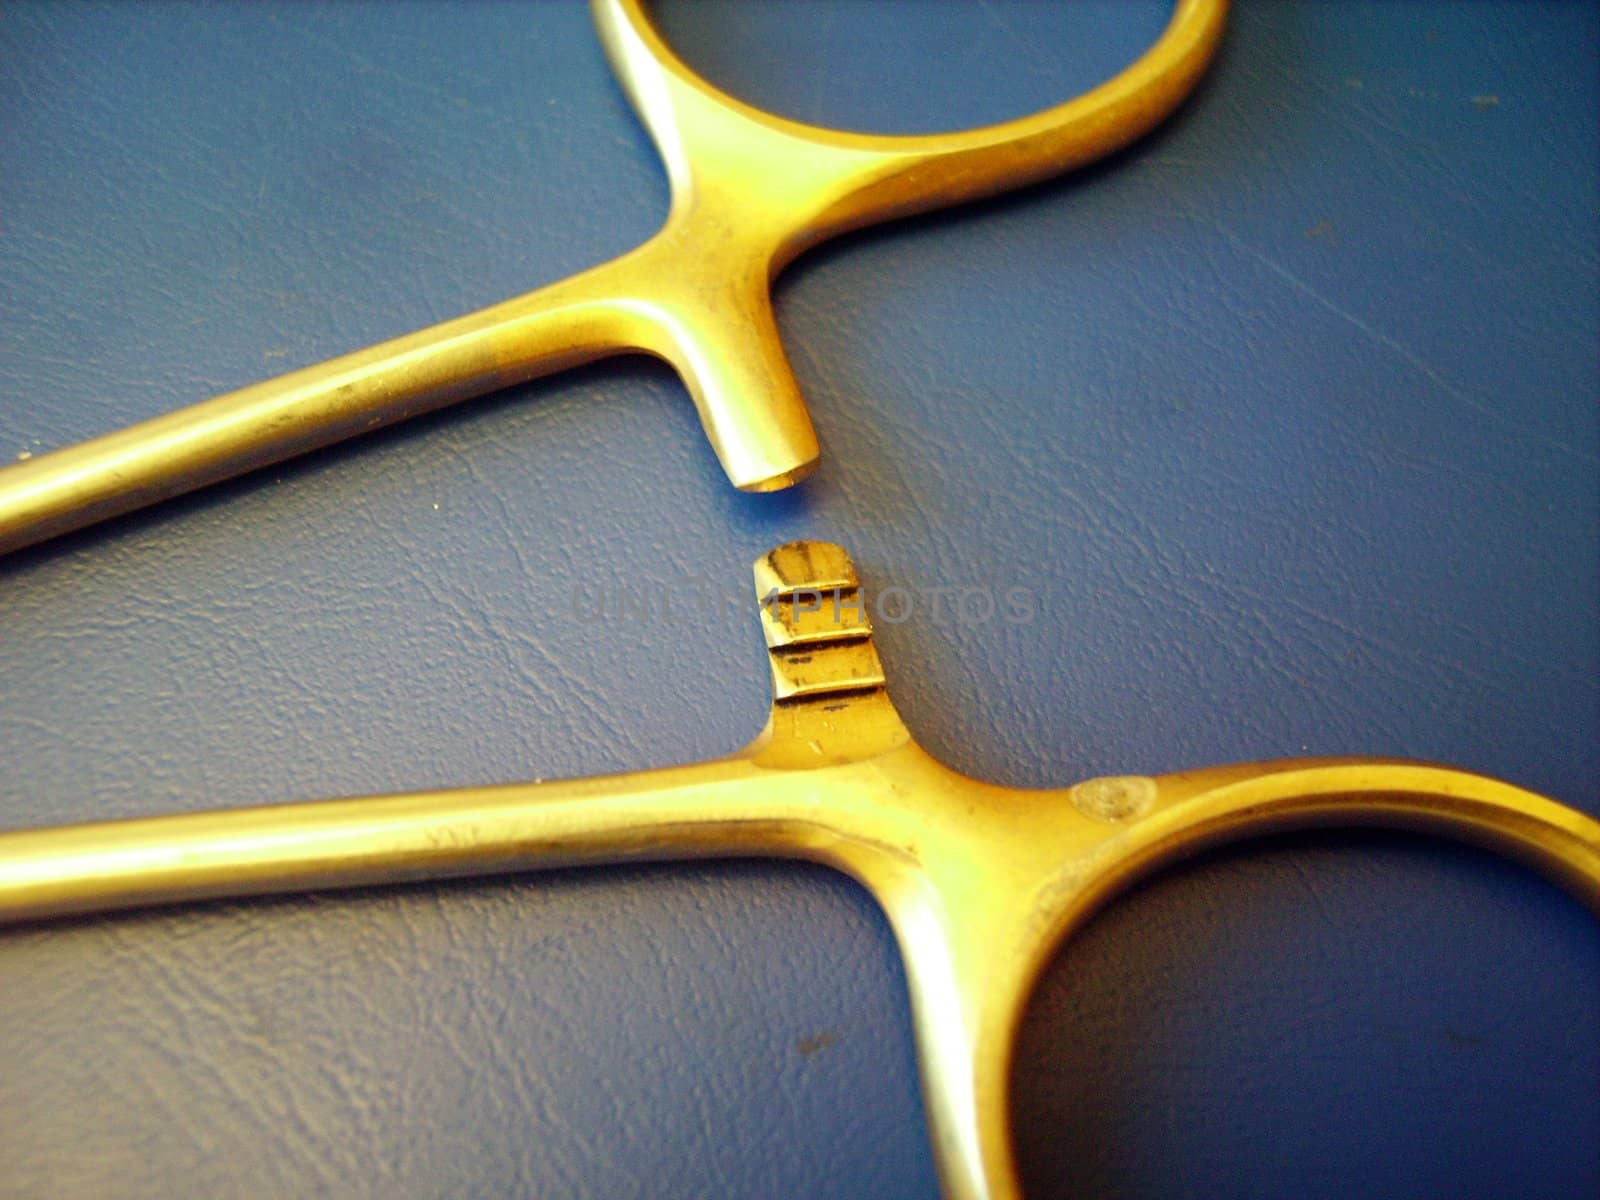 a close detail of a caliper hook on blue background